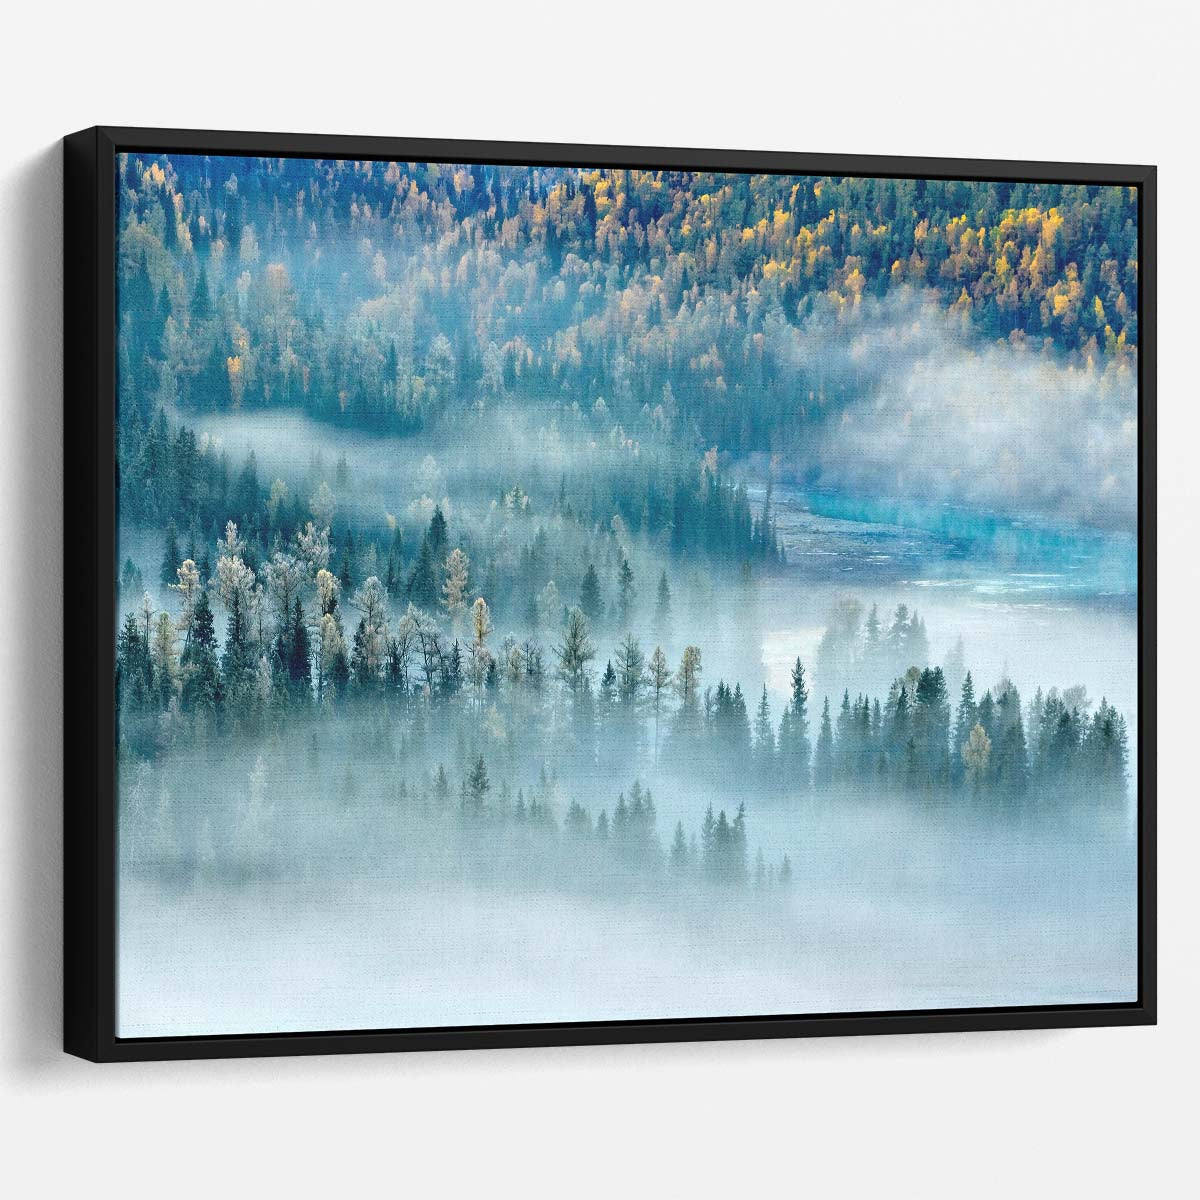 Enchanted Xinjiang Forest Sunrise Mist Wall Art by Luxuriance Designs. Made in USA.